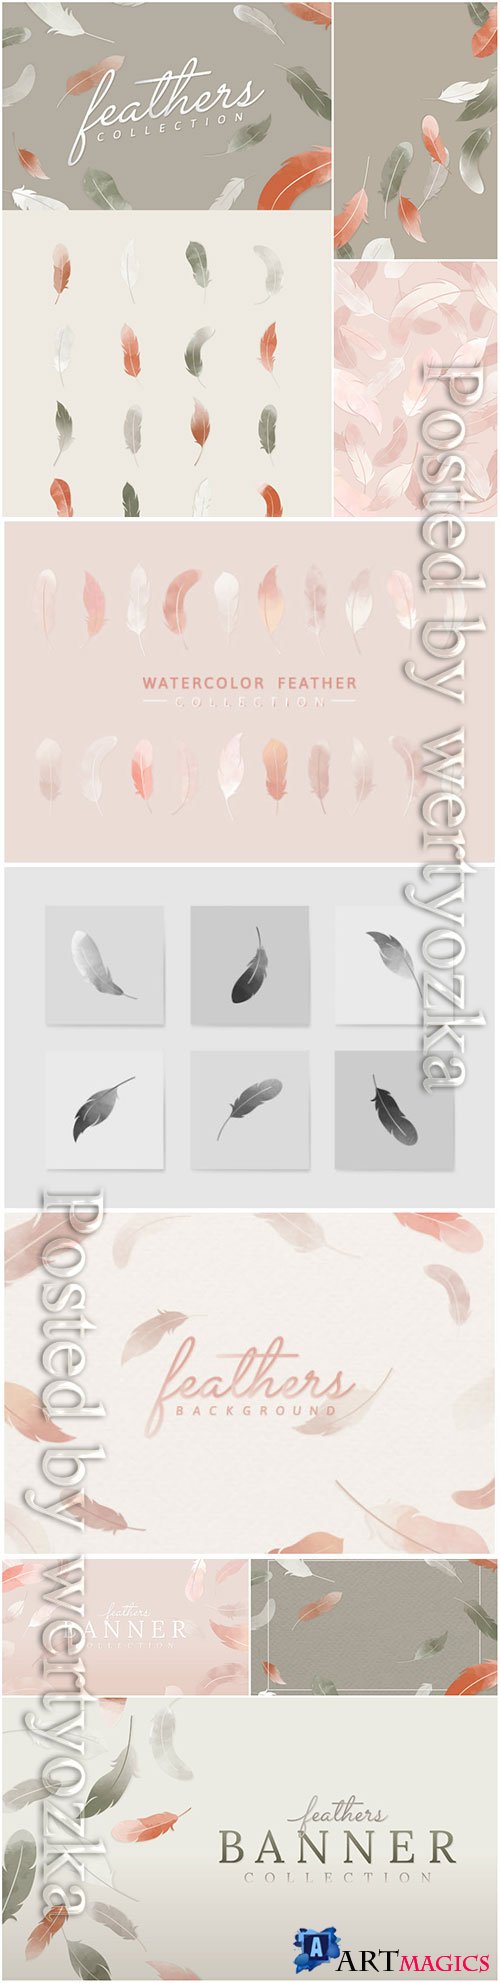 Floating feathers banner vector set